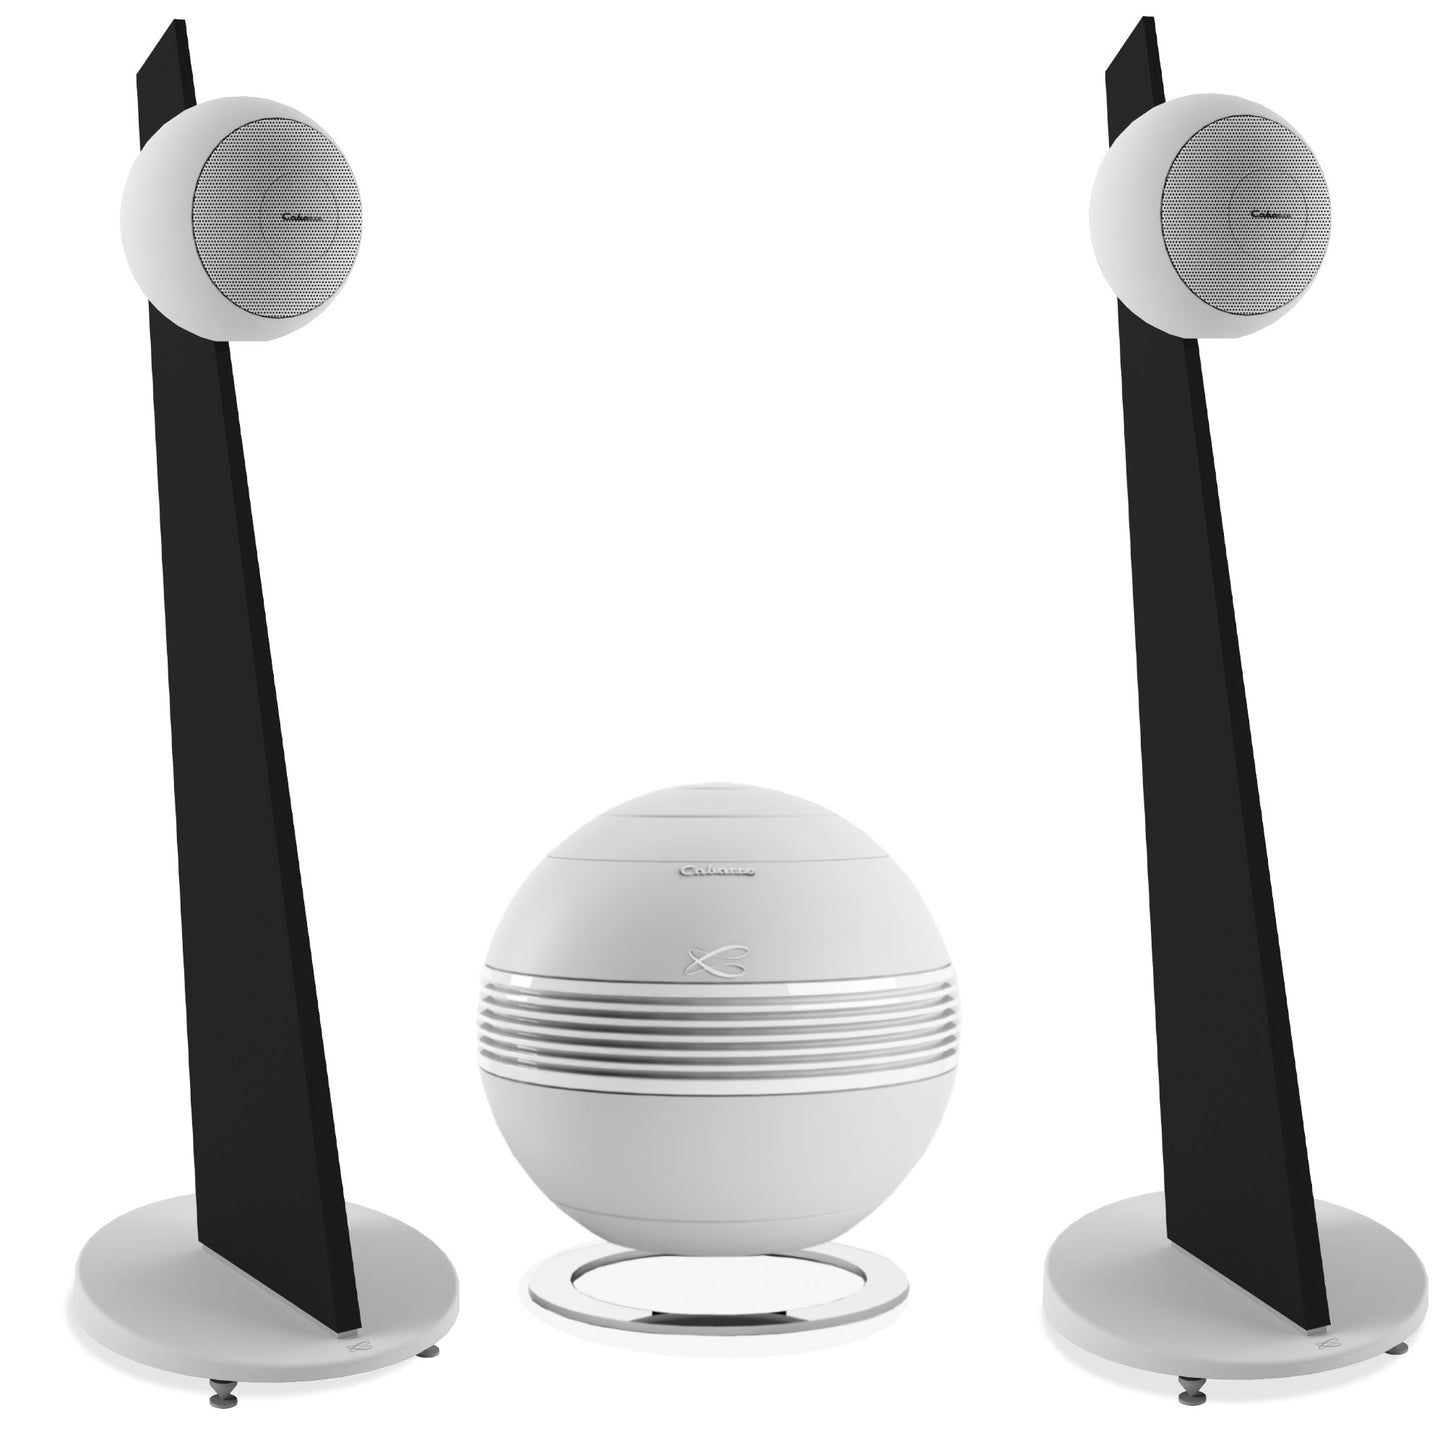 Cabasse Baltic 5 + Pearl Sub Bundle - White speakers on black stands with white subwoofer